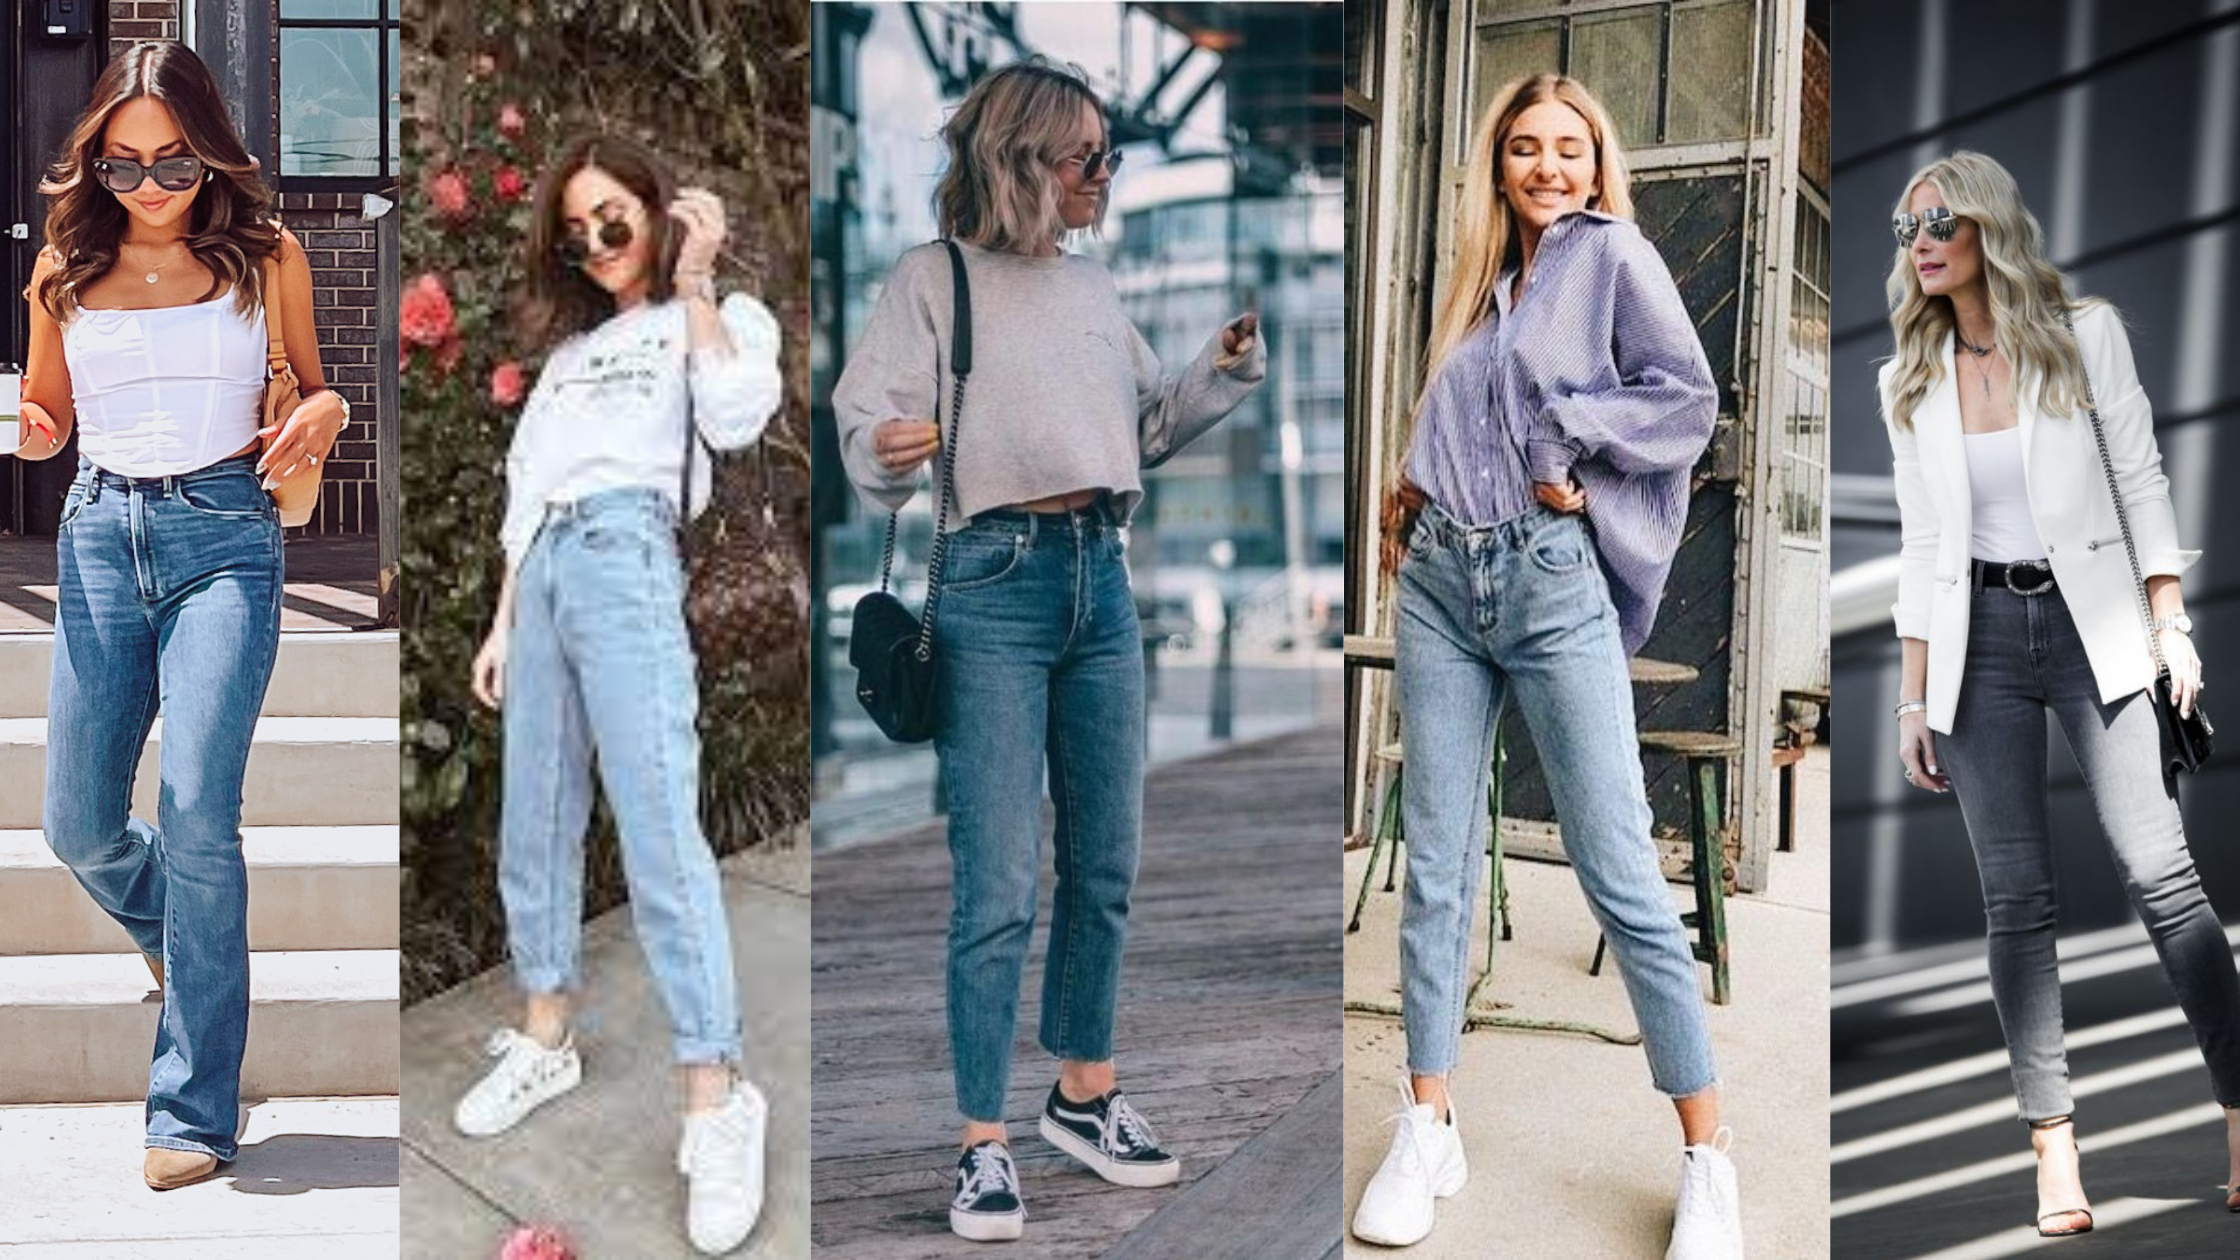 Fall Outfit Ideas: 3 Stylish Looks with One Base – T-shirt, Jeans, and  Shoes - Dreaming Loud